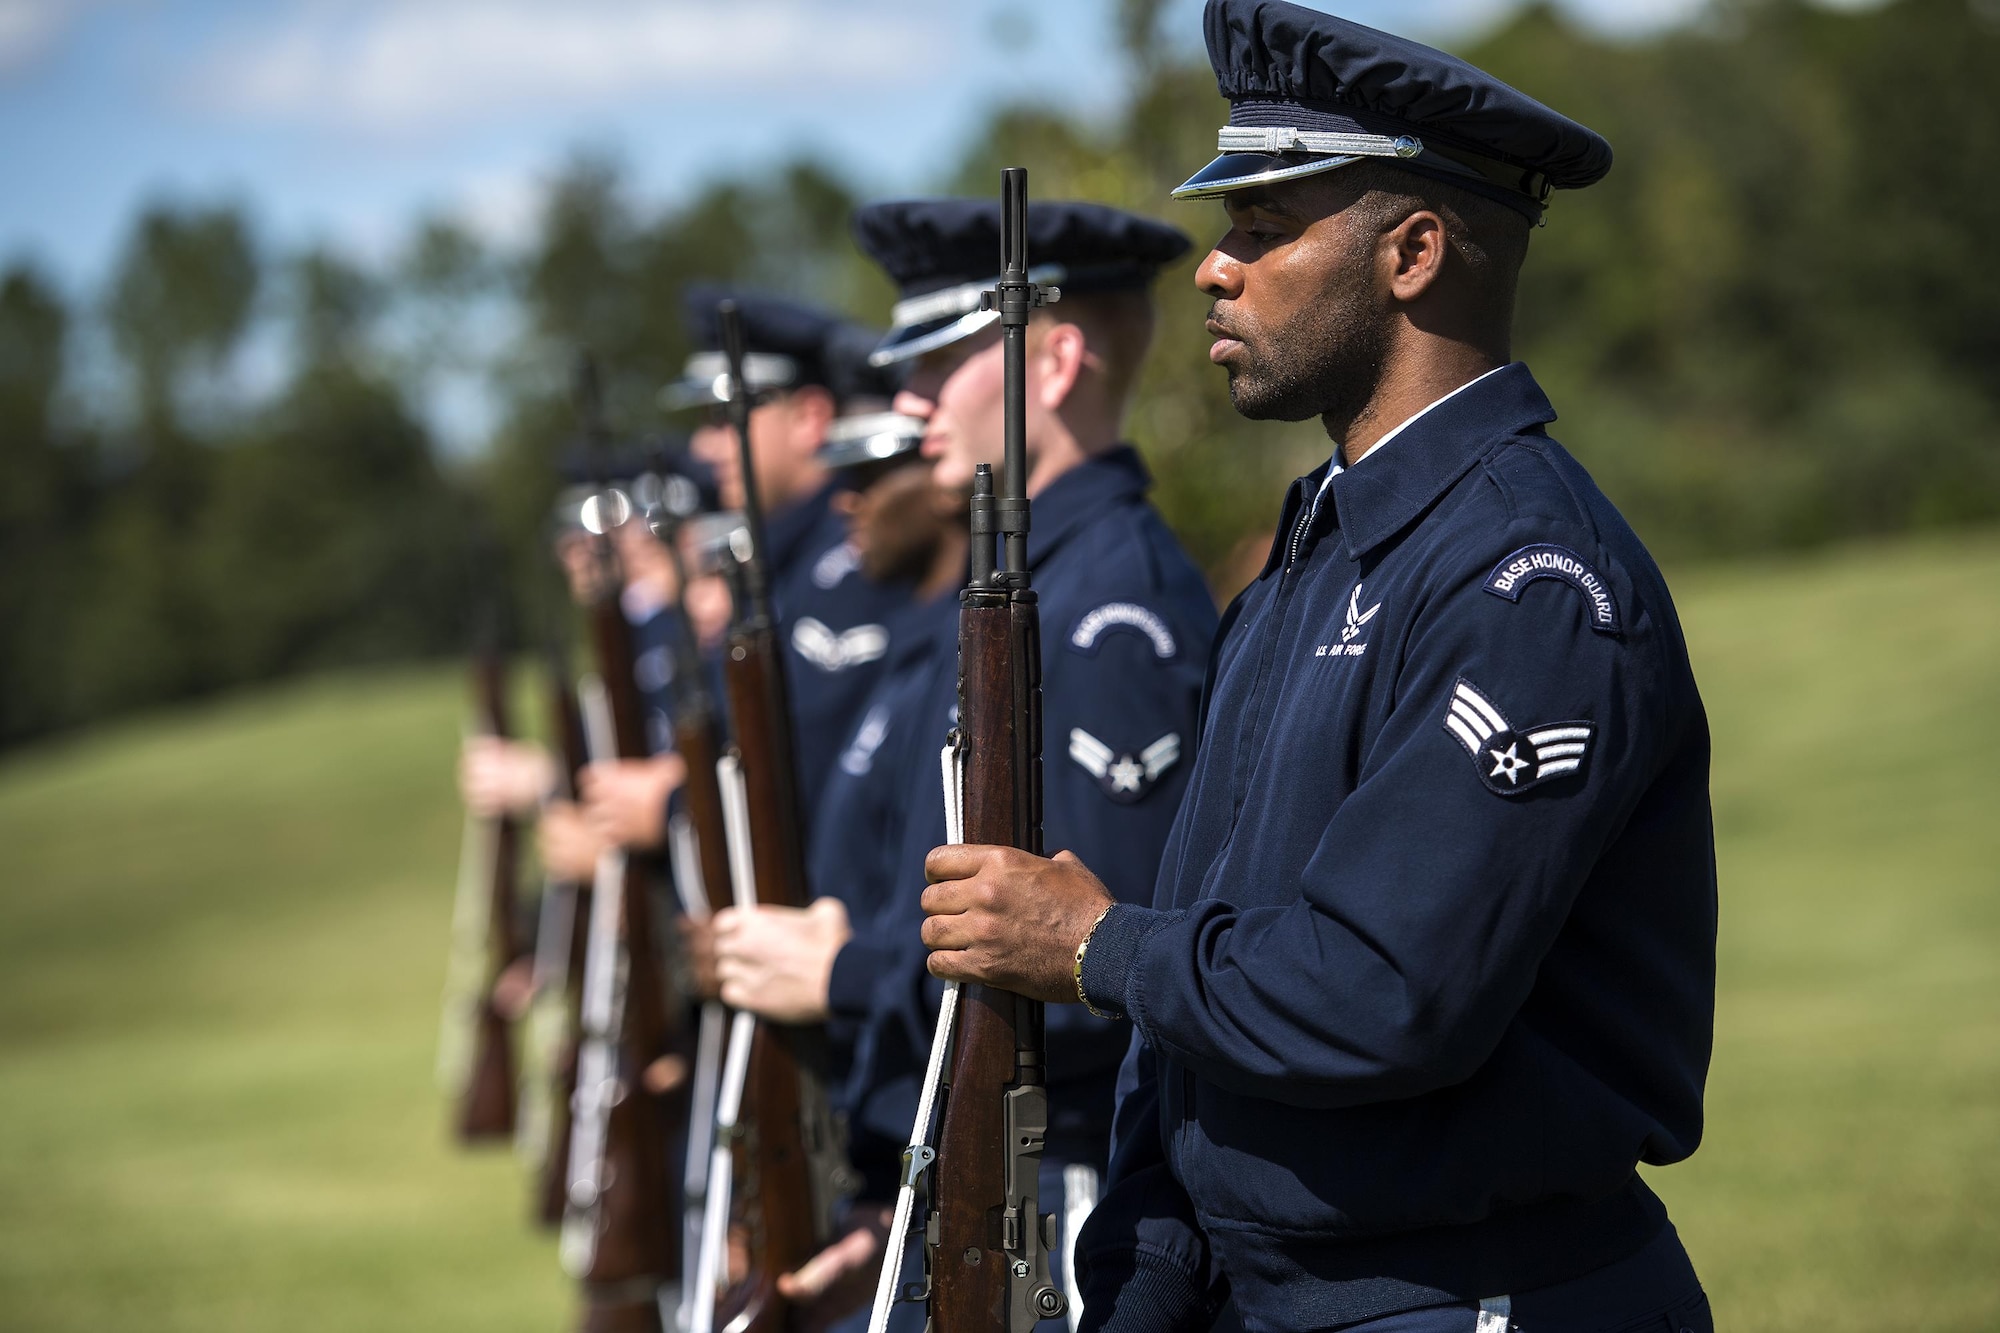 Members of the Moody Air Force Base Honor Guard practice commands before a funeral, Oct. 13, 2016, in Jacksonville, Fla. The firing party executes various commands, striving to be in sync at all times. (U.S. Air Force photo by Airman 1st Class Janiqua P. Robinson)